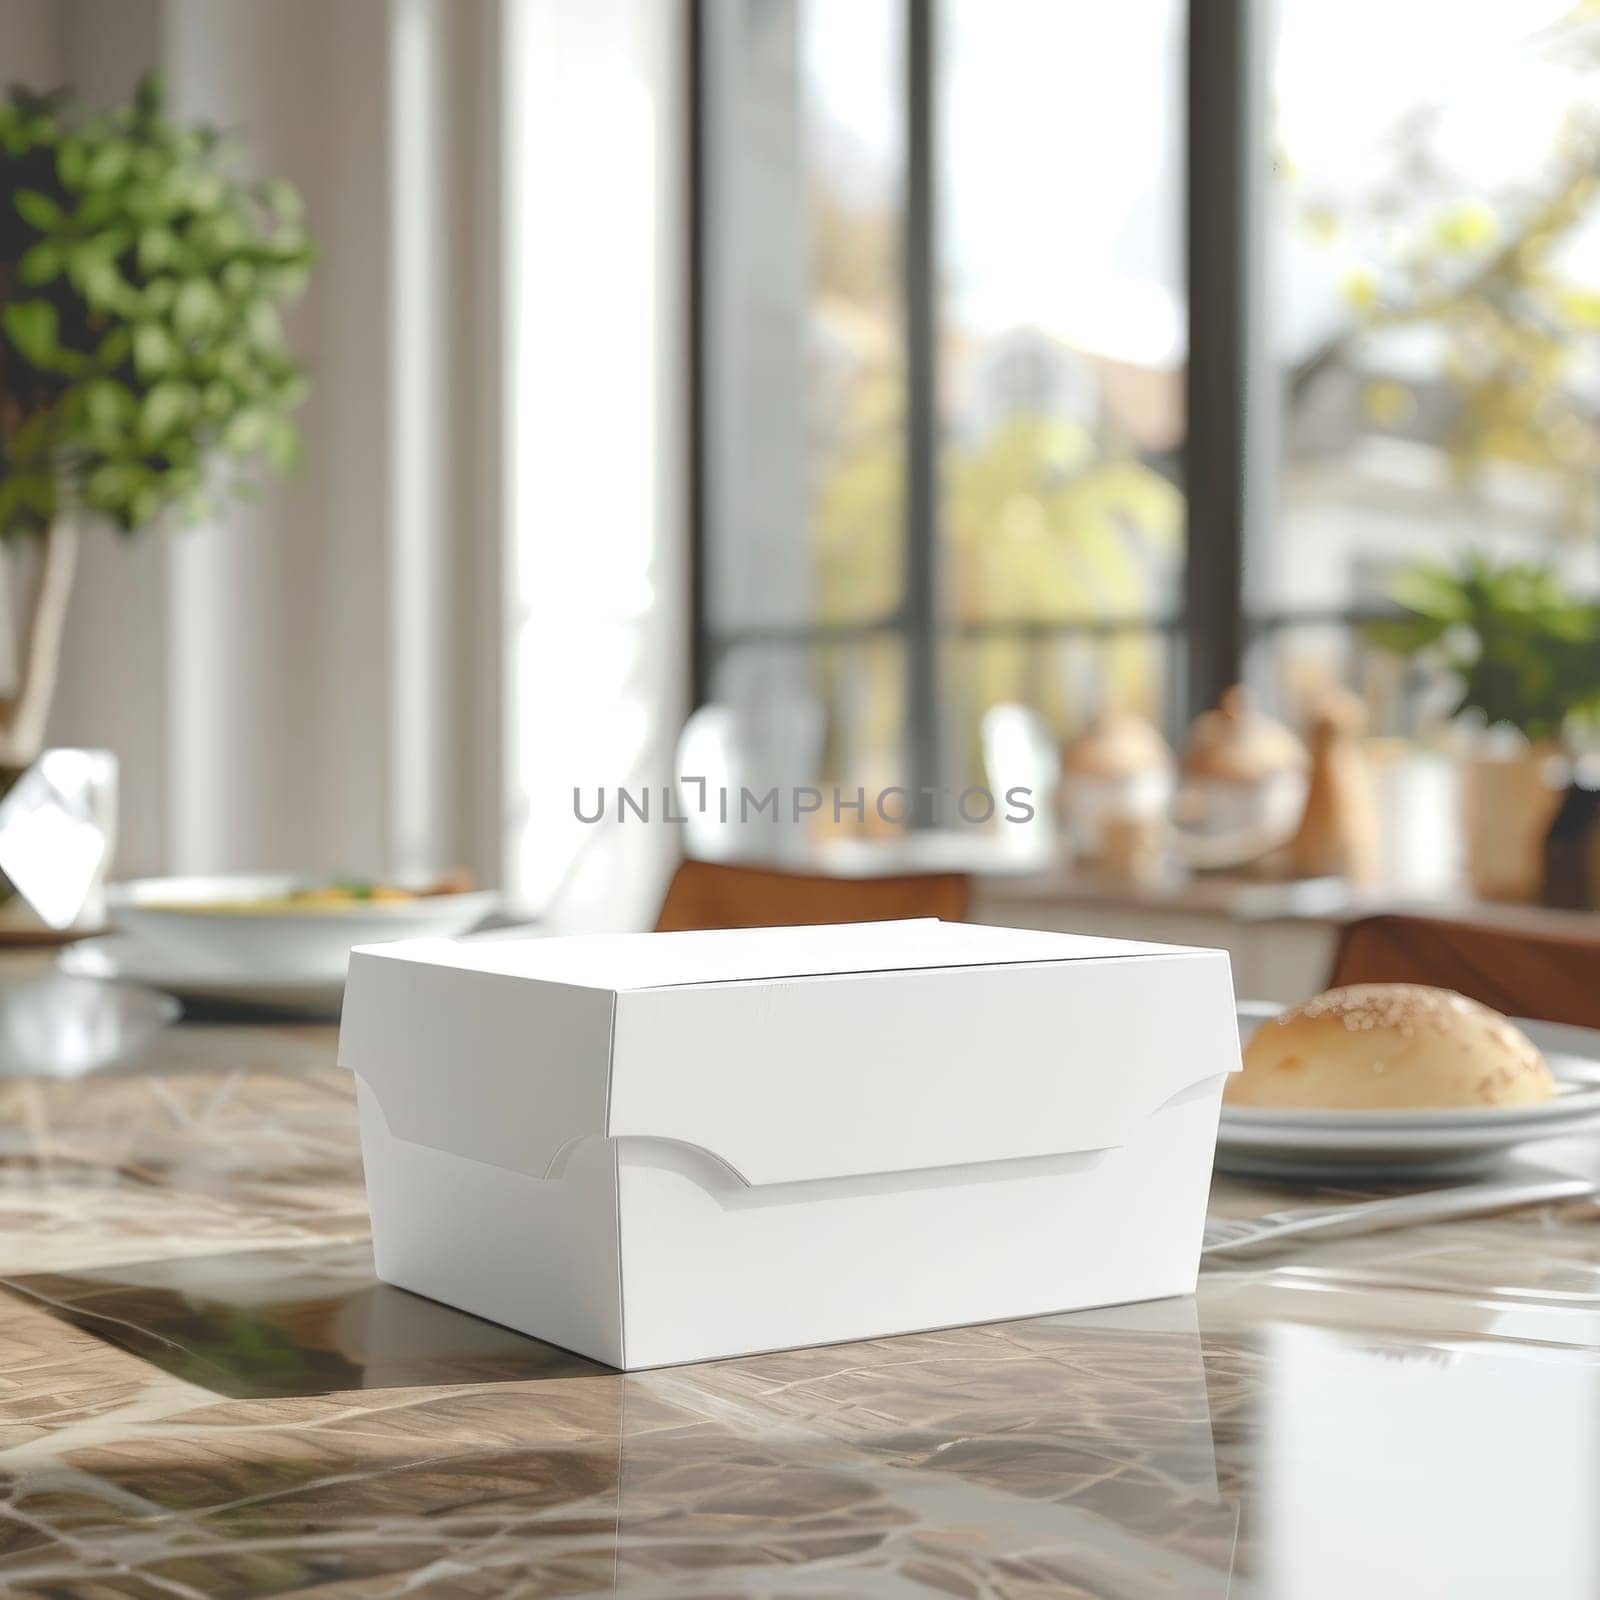 Mockup of a white paper food box placed on the dining table